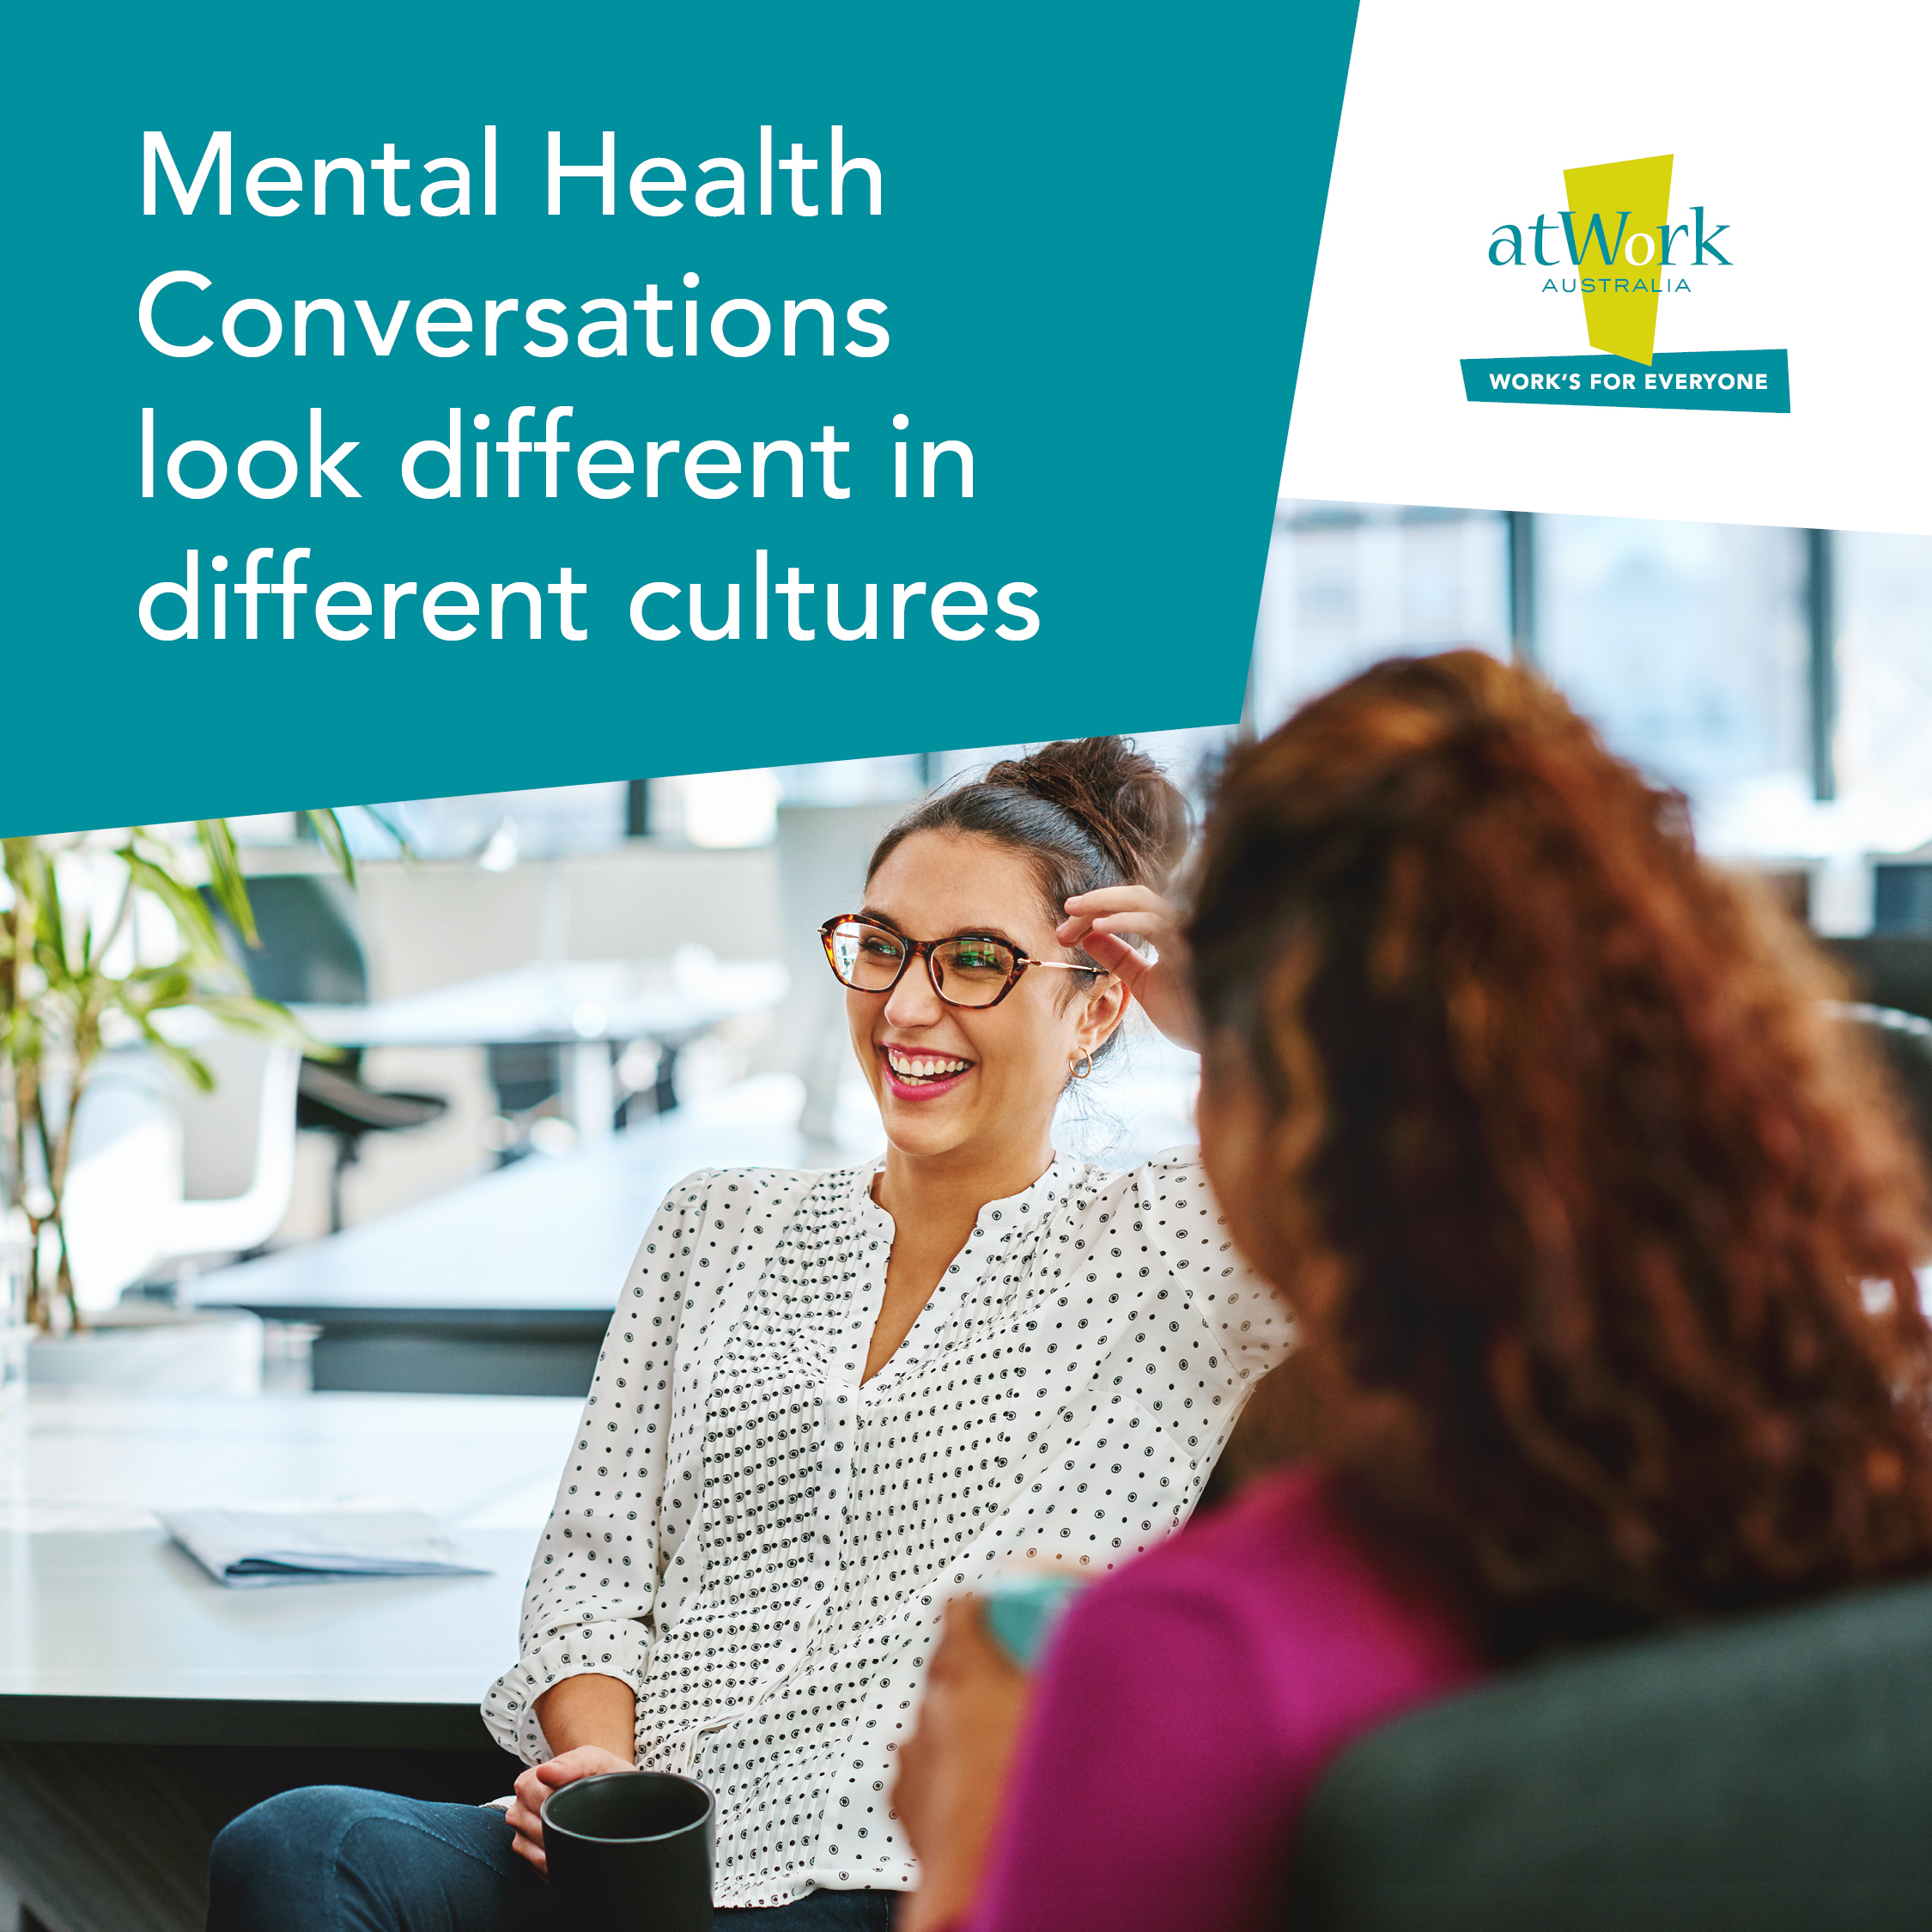 Mental Health conversations look different in different cultures